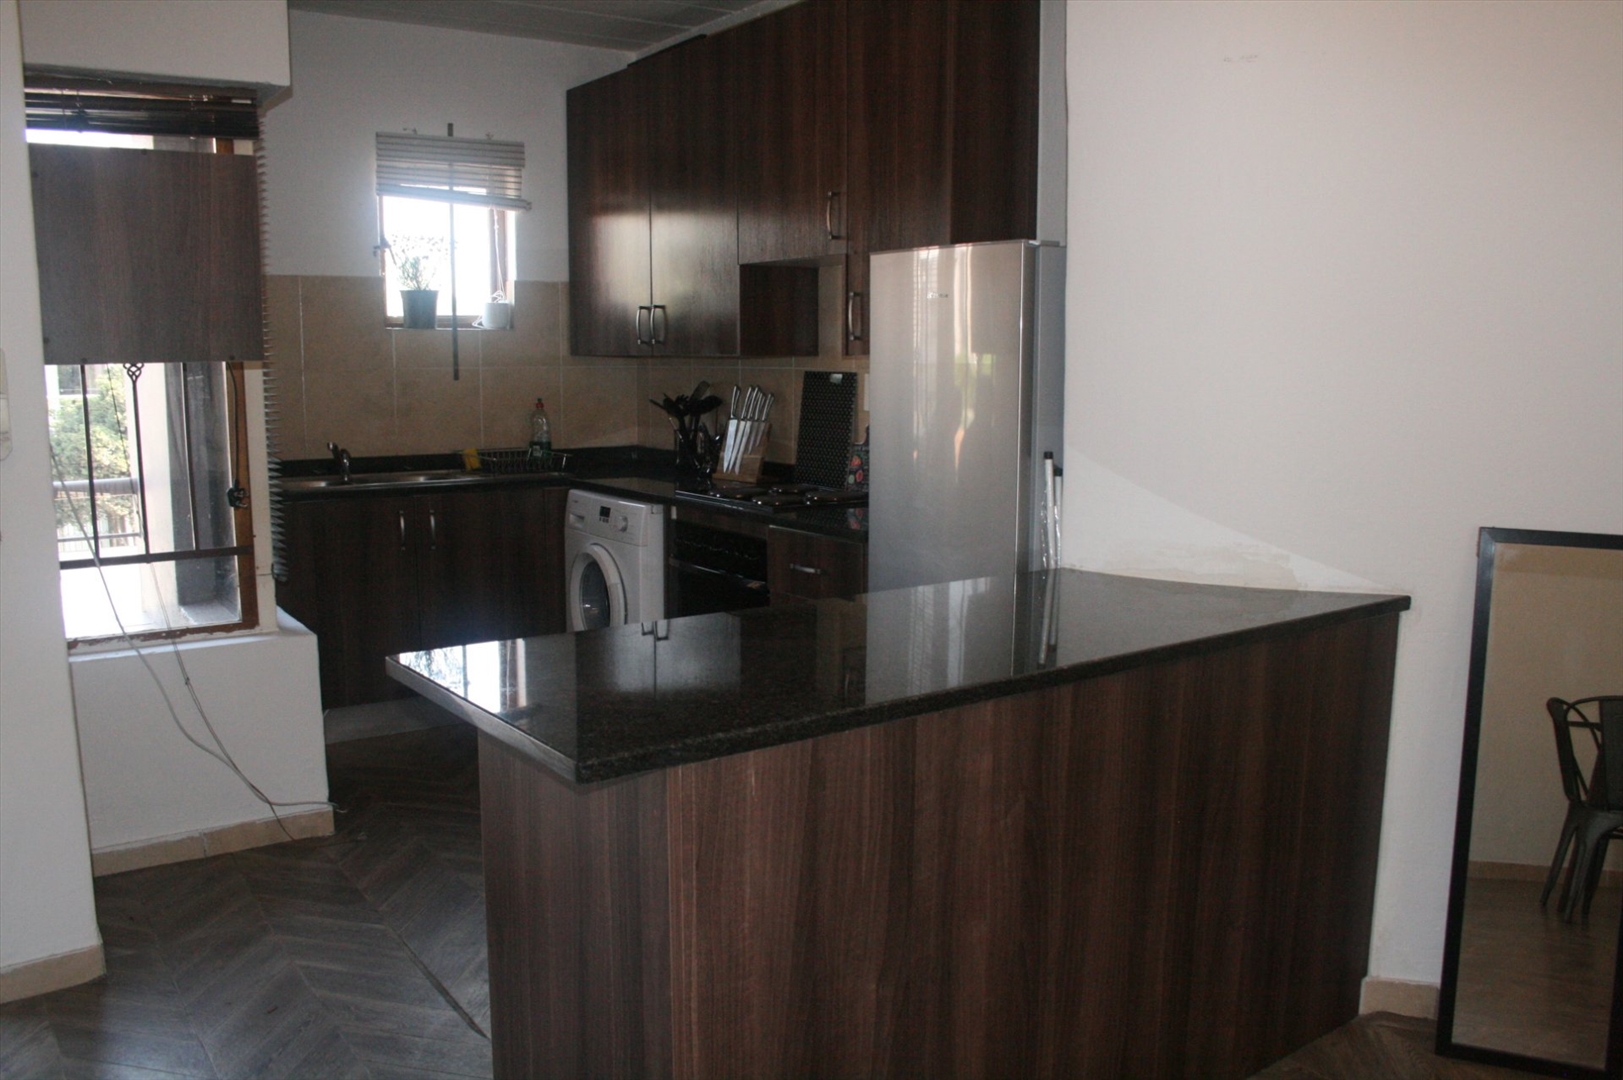 2 Bedroom Apartment In Woodmead Sandton For Sale For R 1 150 000